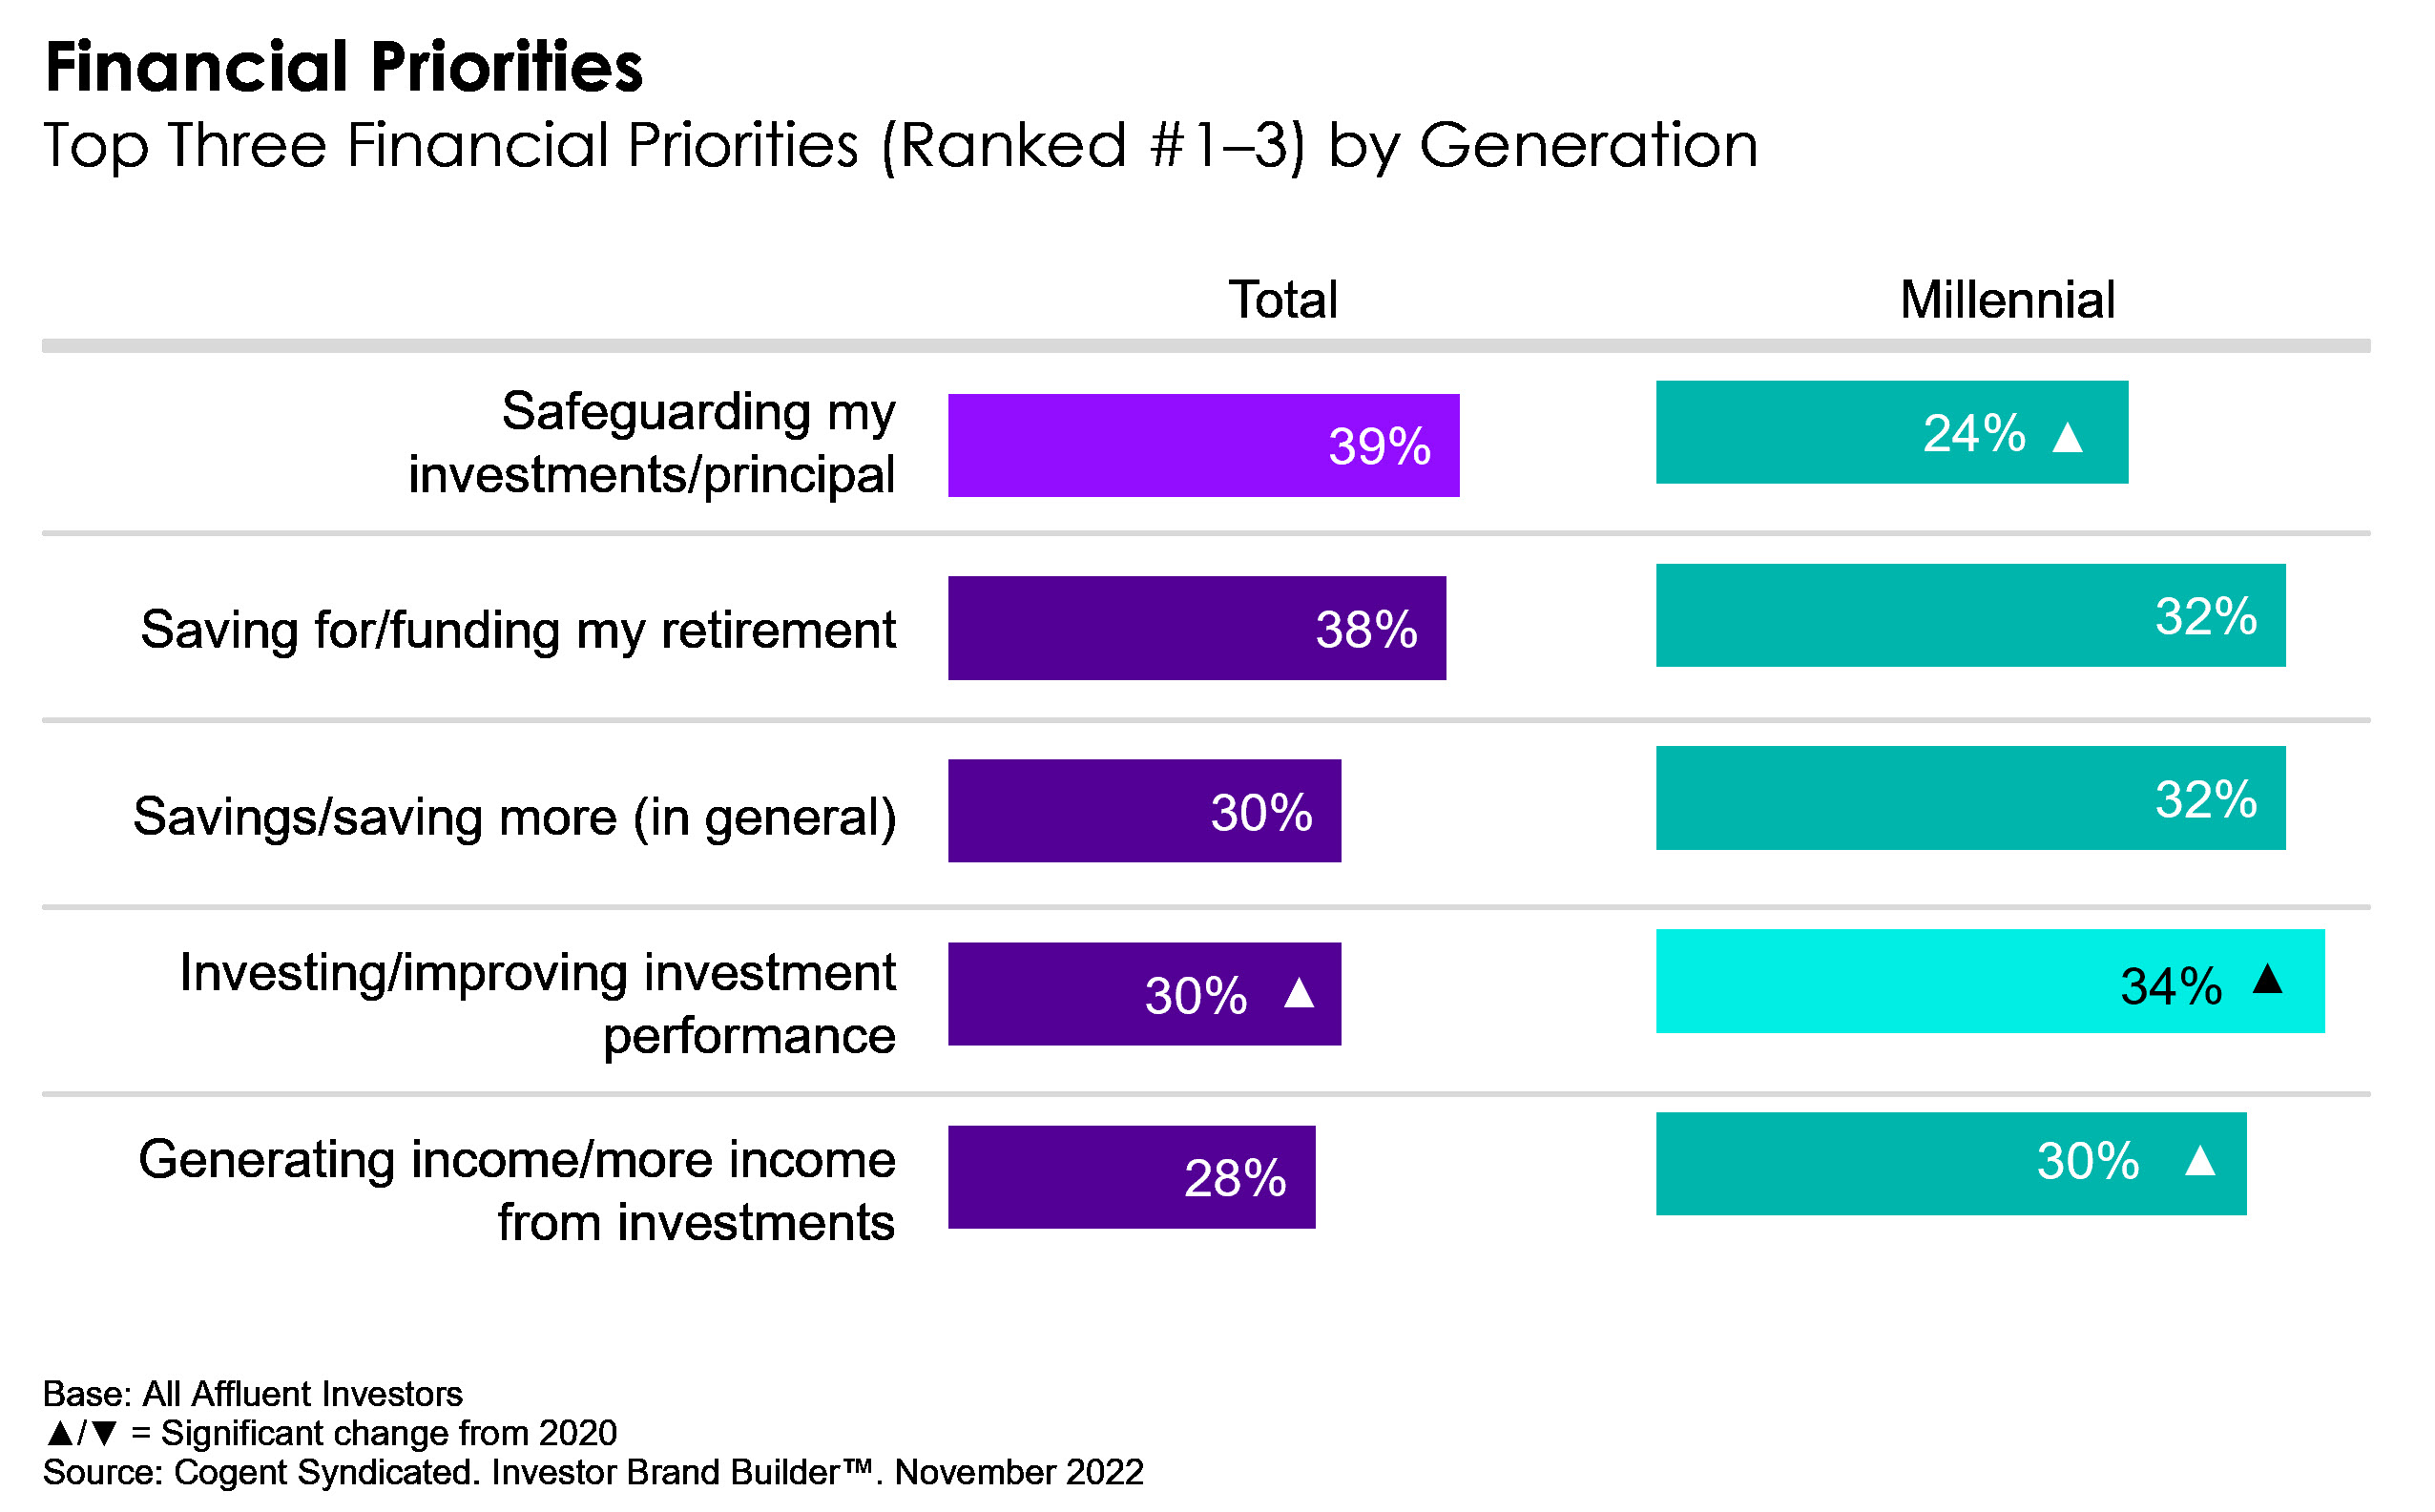 A bar chart showing top financial priorities among affluent investors